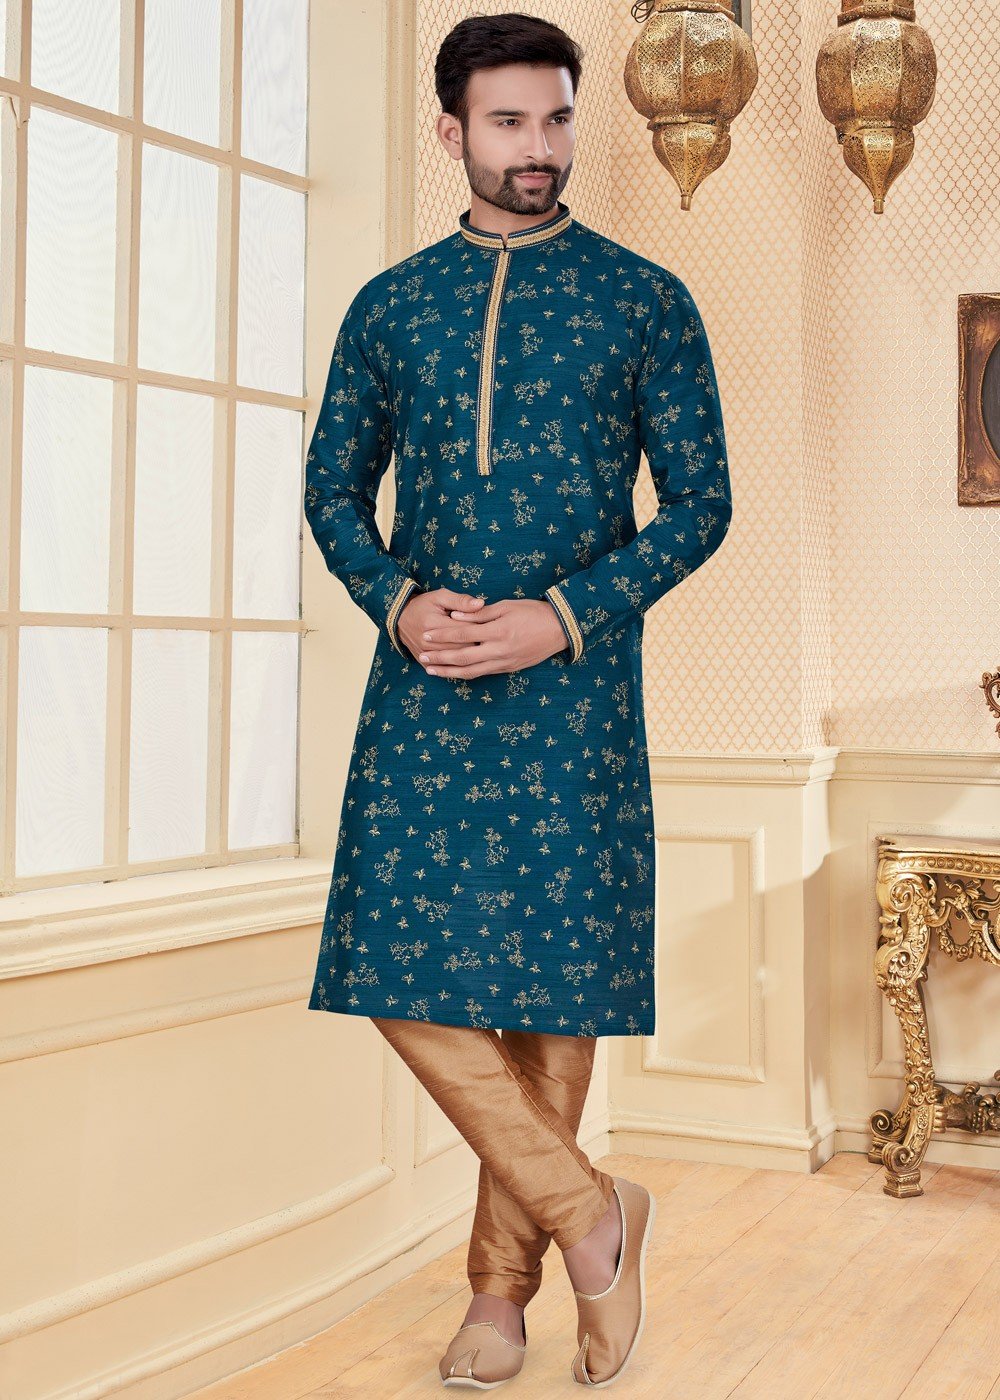 Shop Now Desi Boys 2 Party Wear Kurta Pajama With Koti Collection Full  Catalog Available At Wholesale Rate